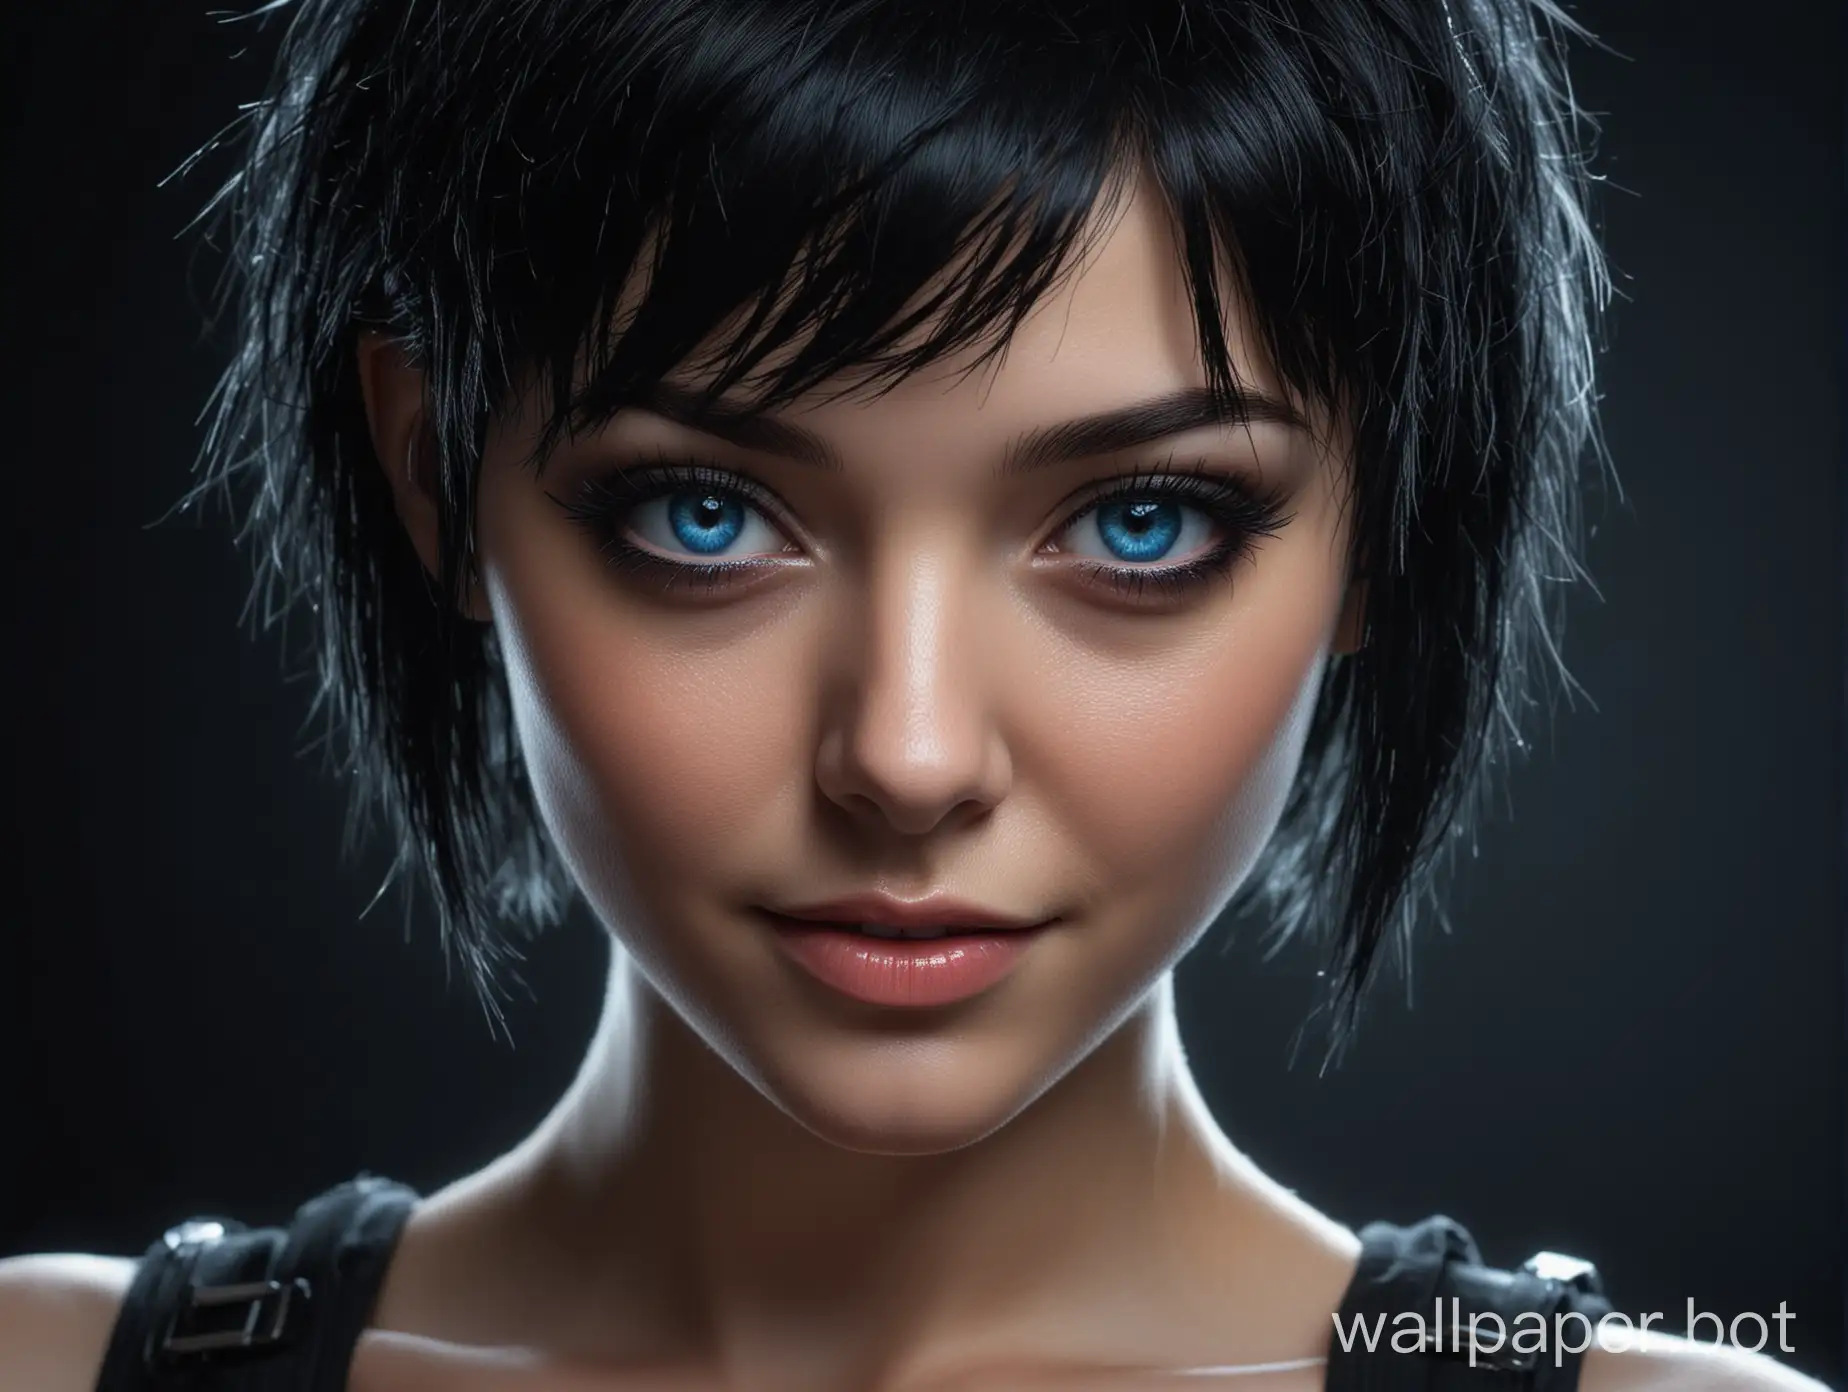 beautiful girl, close-up of face, seductive smile, bright blue eyes, short black hair, in cyberpunk style, dark background